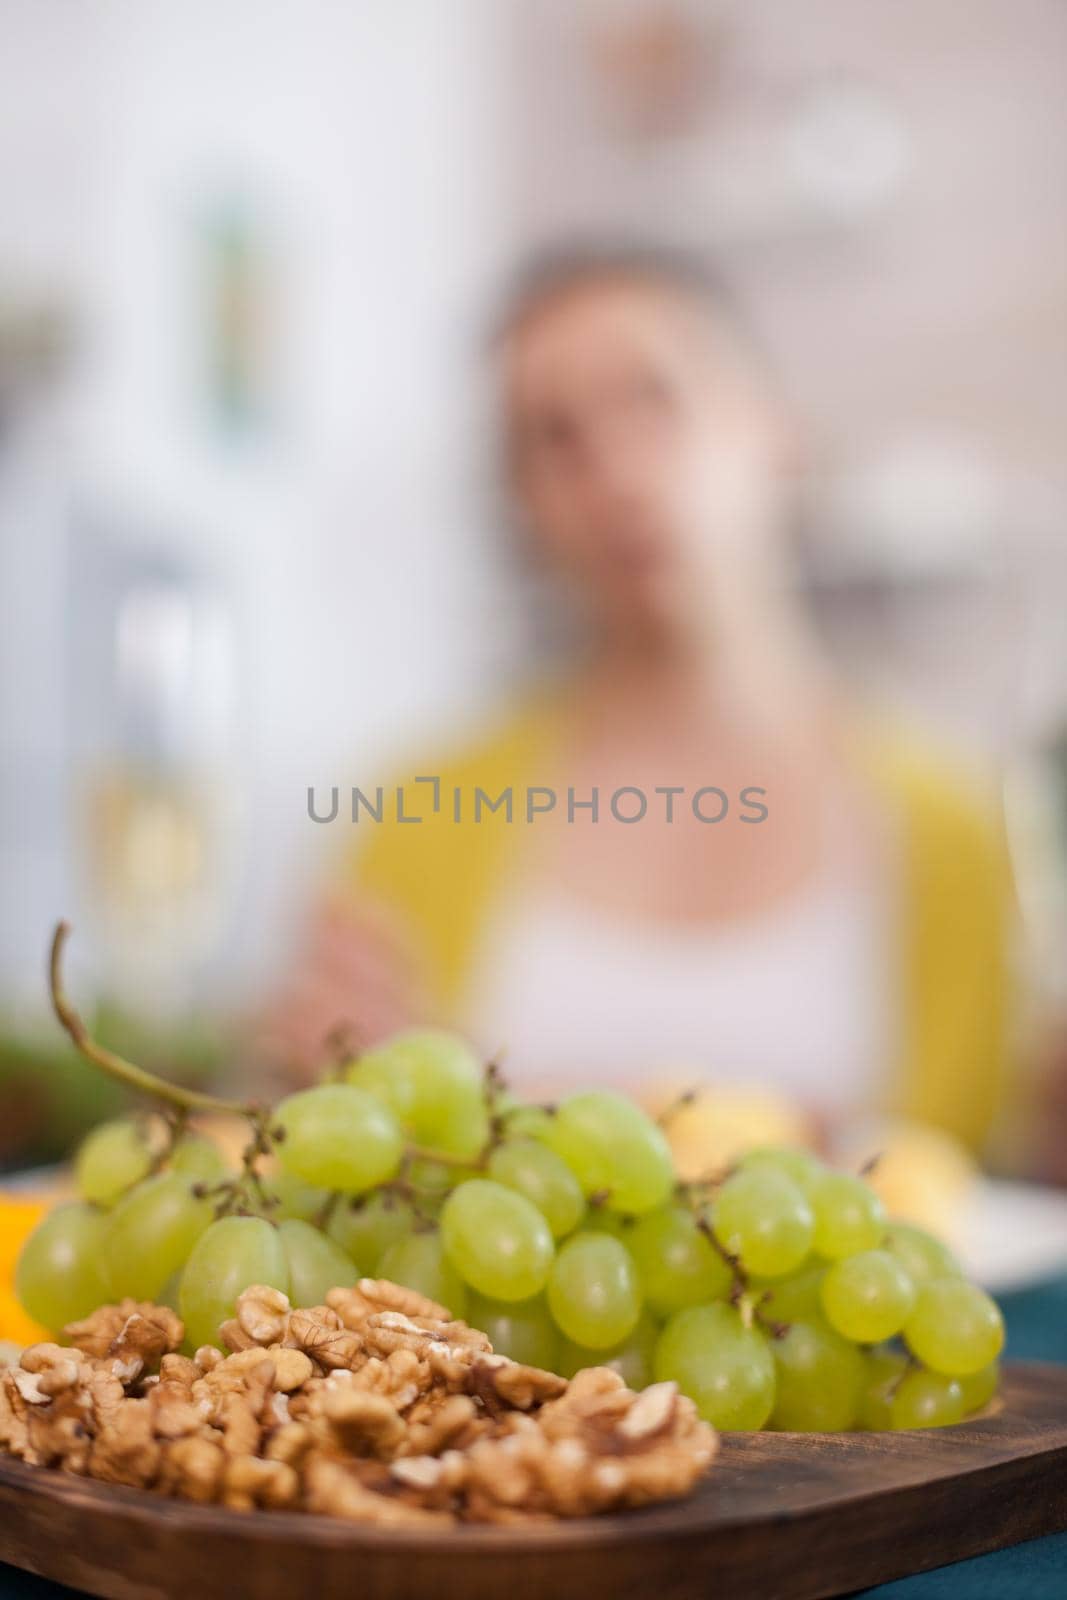 Close up of tasty grapes on wooden table with female blurred in the background.